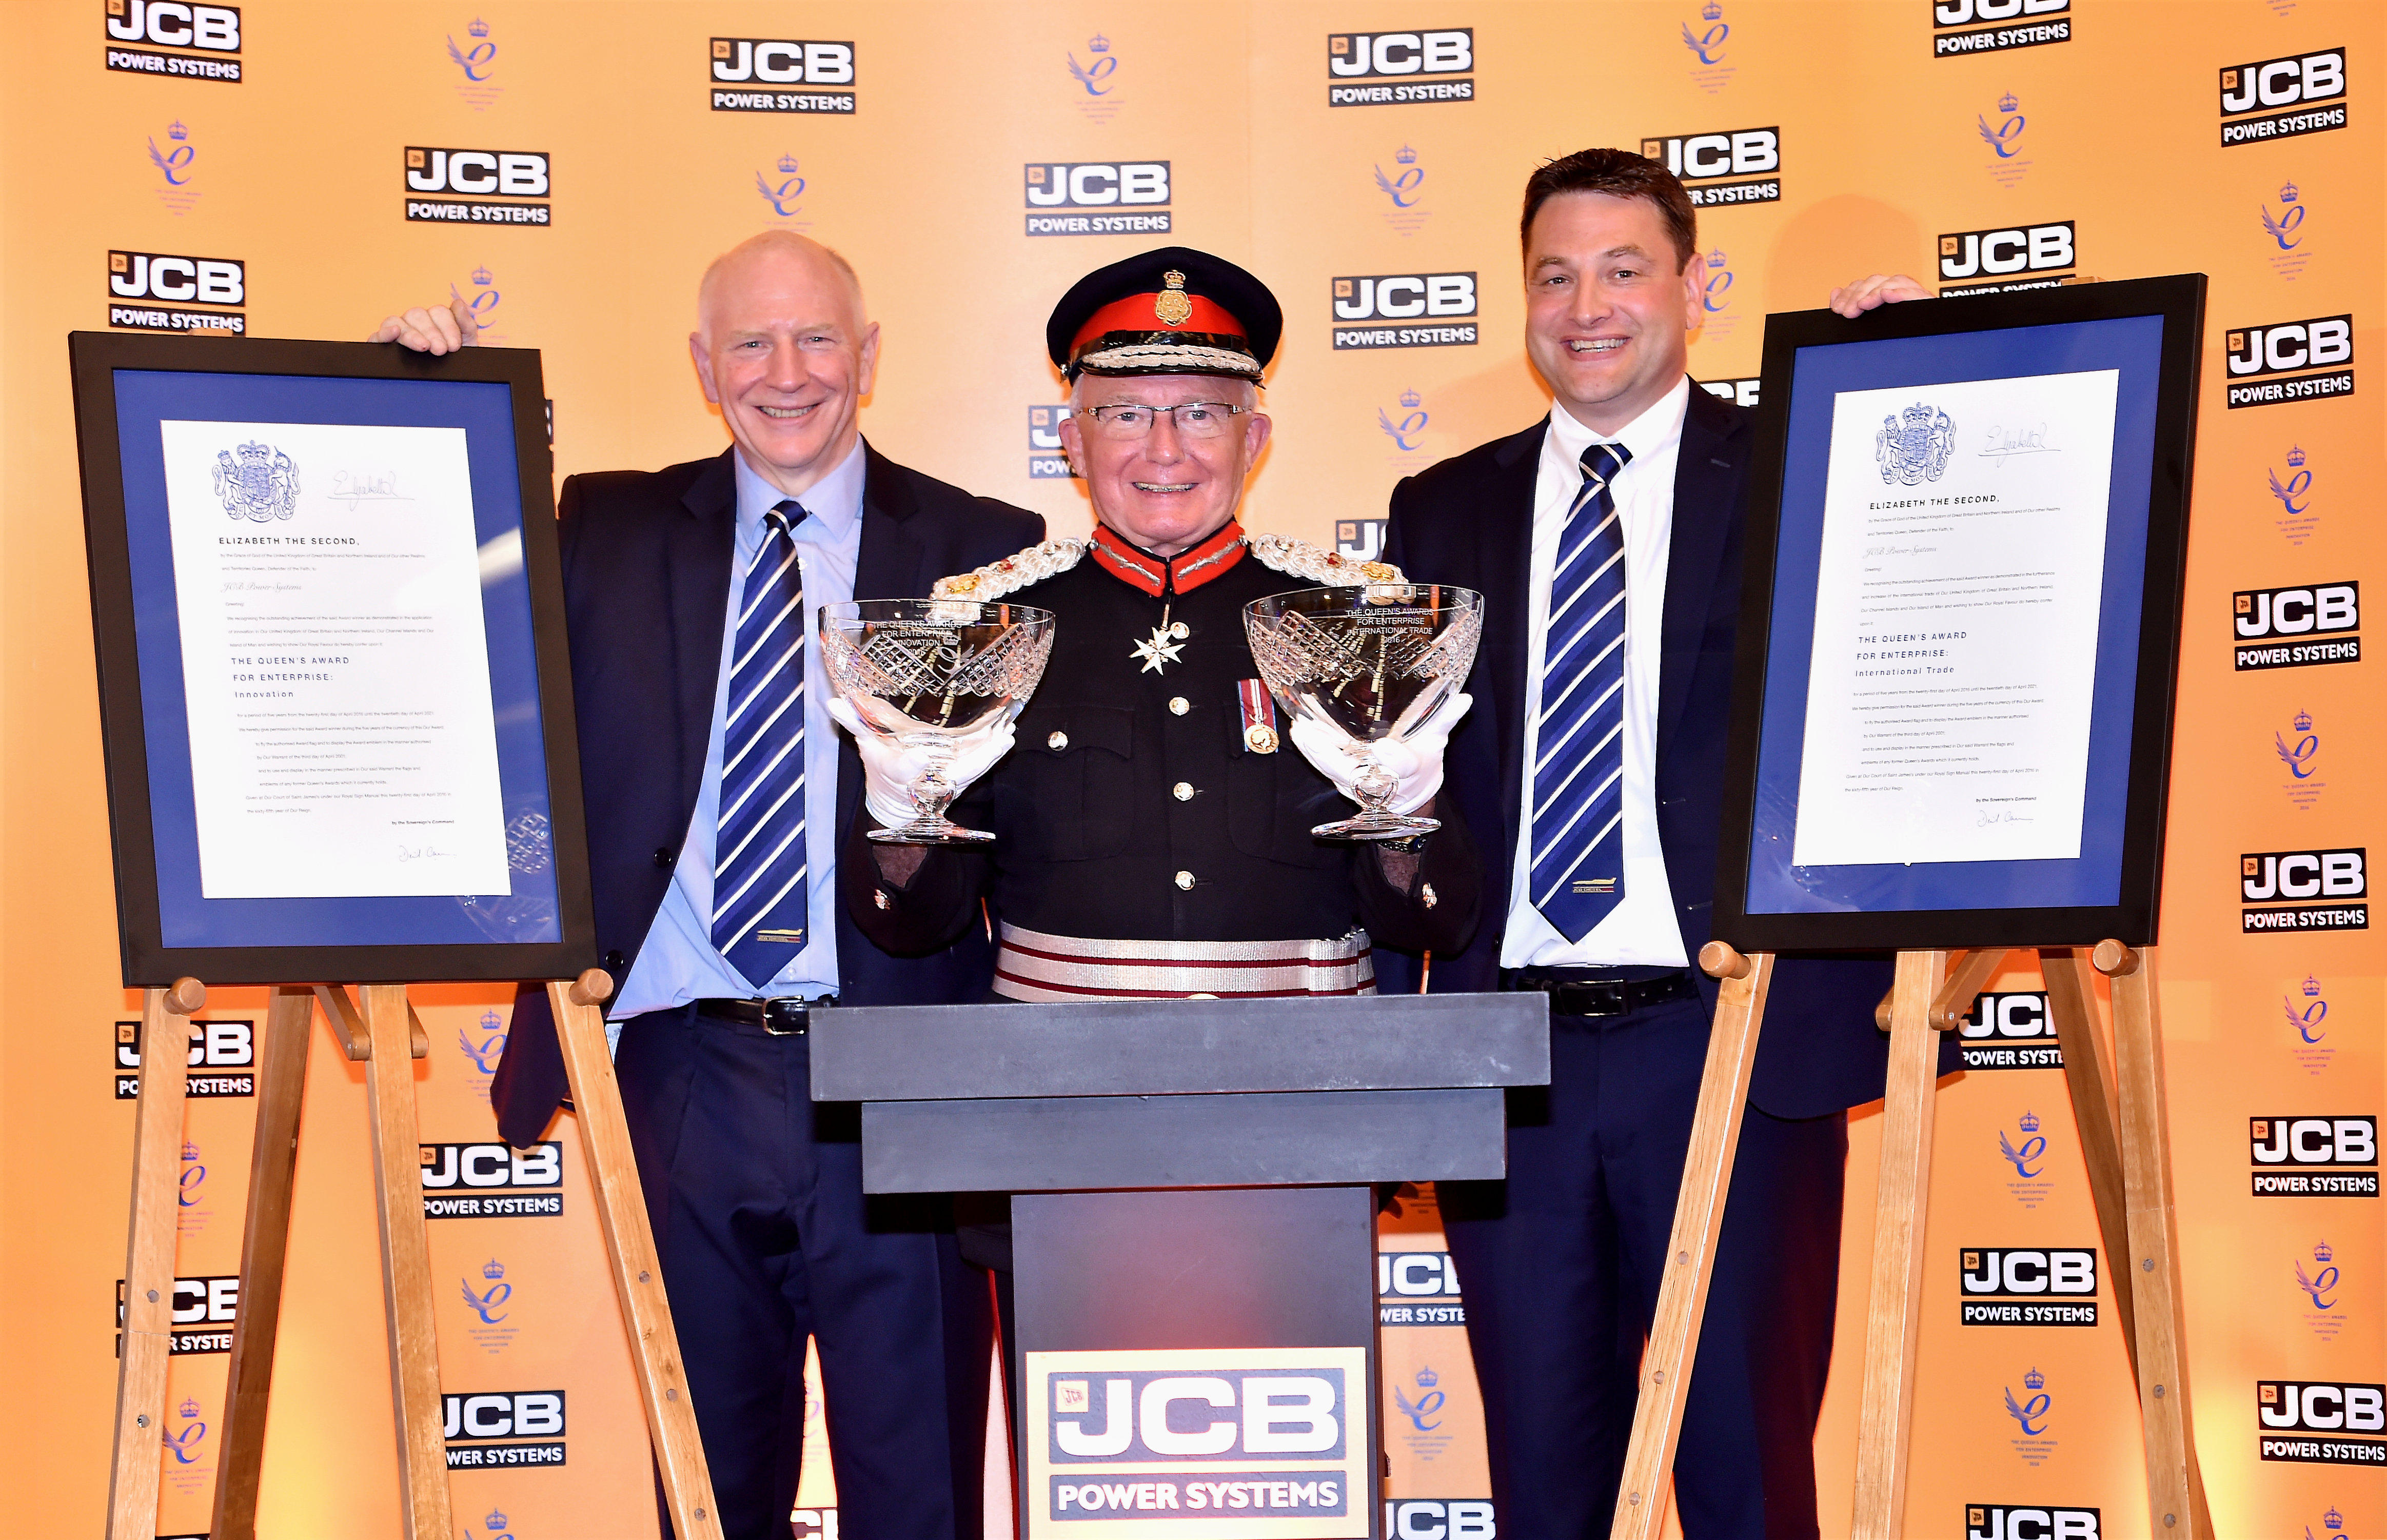 Queen's Awards to JCB Power Systems Group 